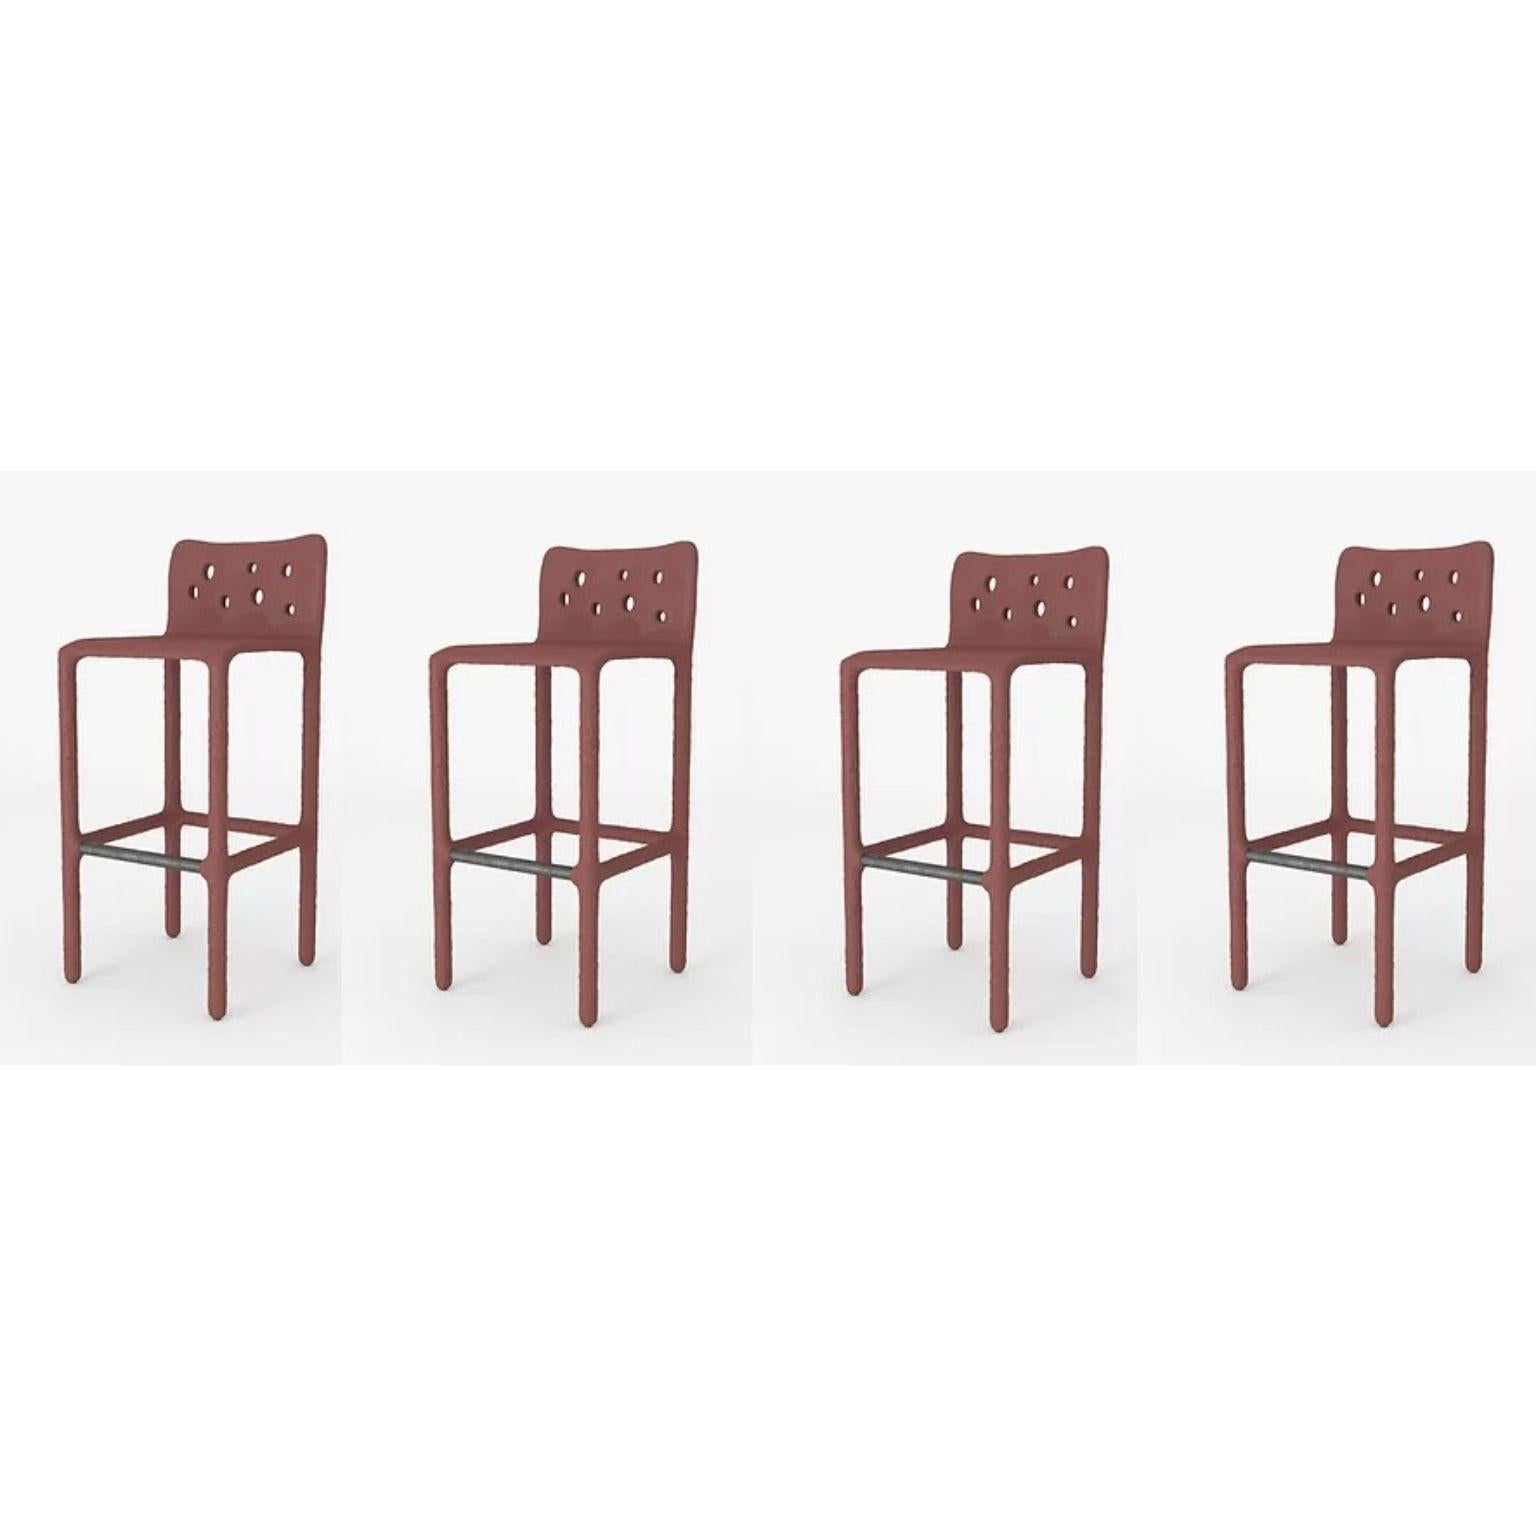 Set of 4 outdoor red sculpted contemporary chairs by Faina
Design: Victoriya Yakusha
Material: steel, flax rubber, biopolymer, cellulose
Dimensions: Height: 106 x Width: 45 x Sitting place width: 49 Legs height: 80 cm
Weight: 20